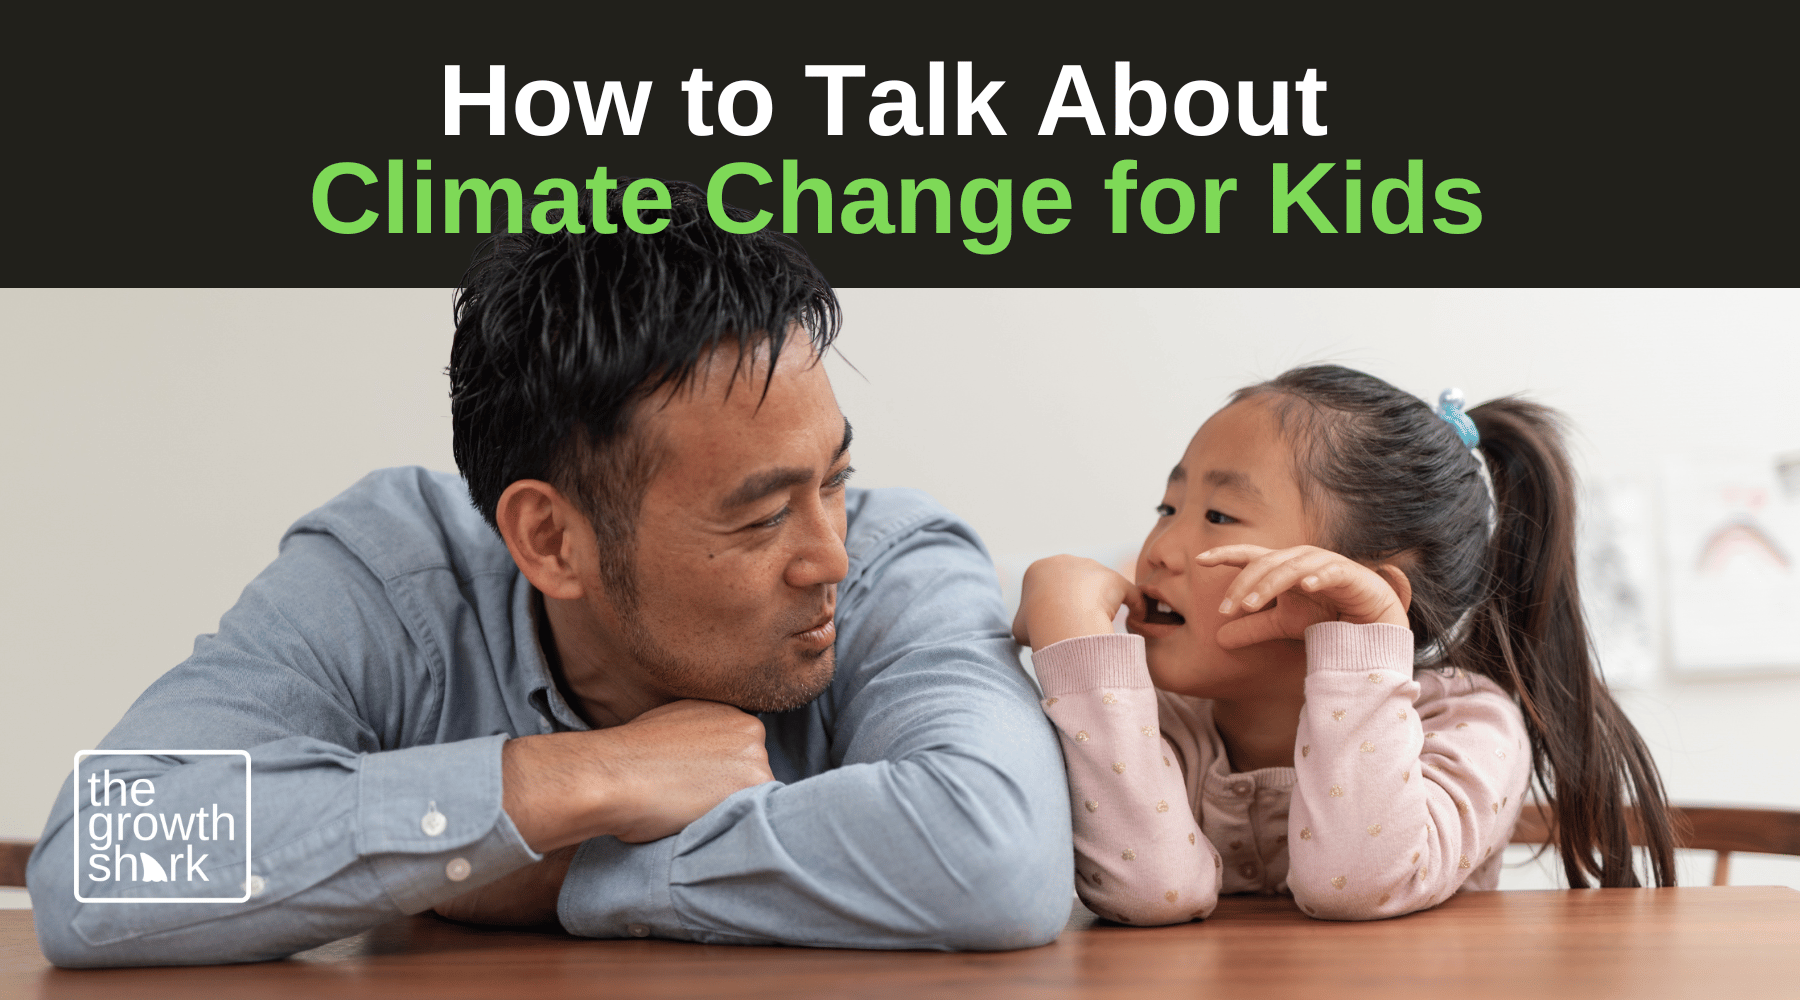 Talk About Climate Change for Kids